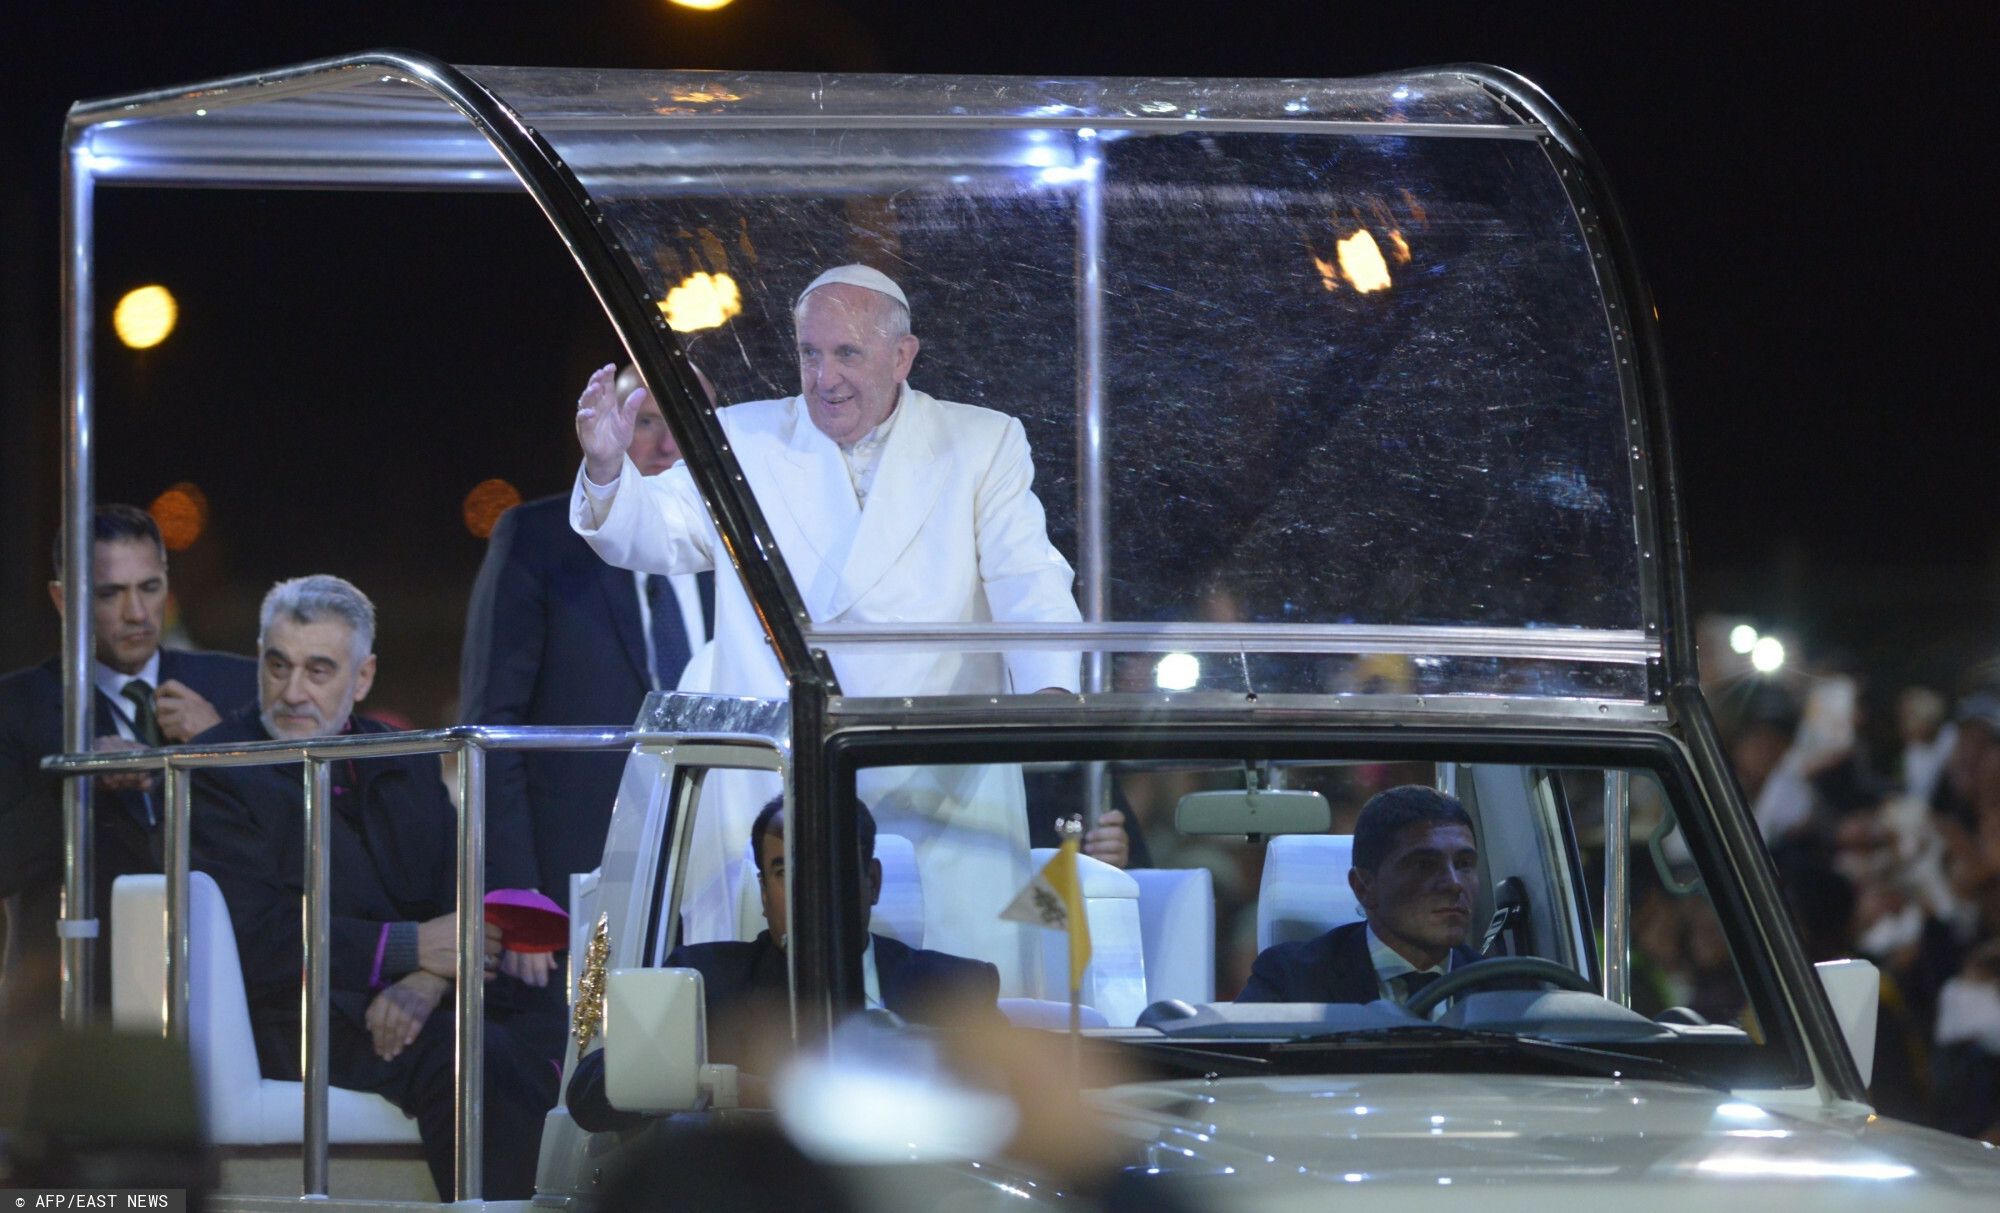 Pope Francis waves from the pope mobile during a visit at the Cambodromo in Santa Cruz, on July 8, 2015. Pope Francis, the first Latin American pontiff, arrived in Bolivia on the second leg of a three-nation tour of the continent's poorest countries, wher